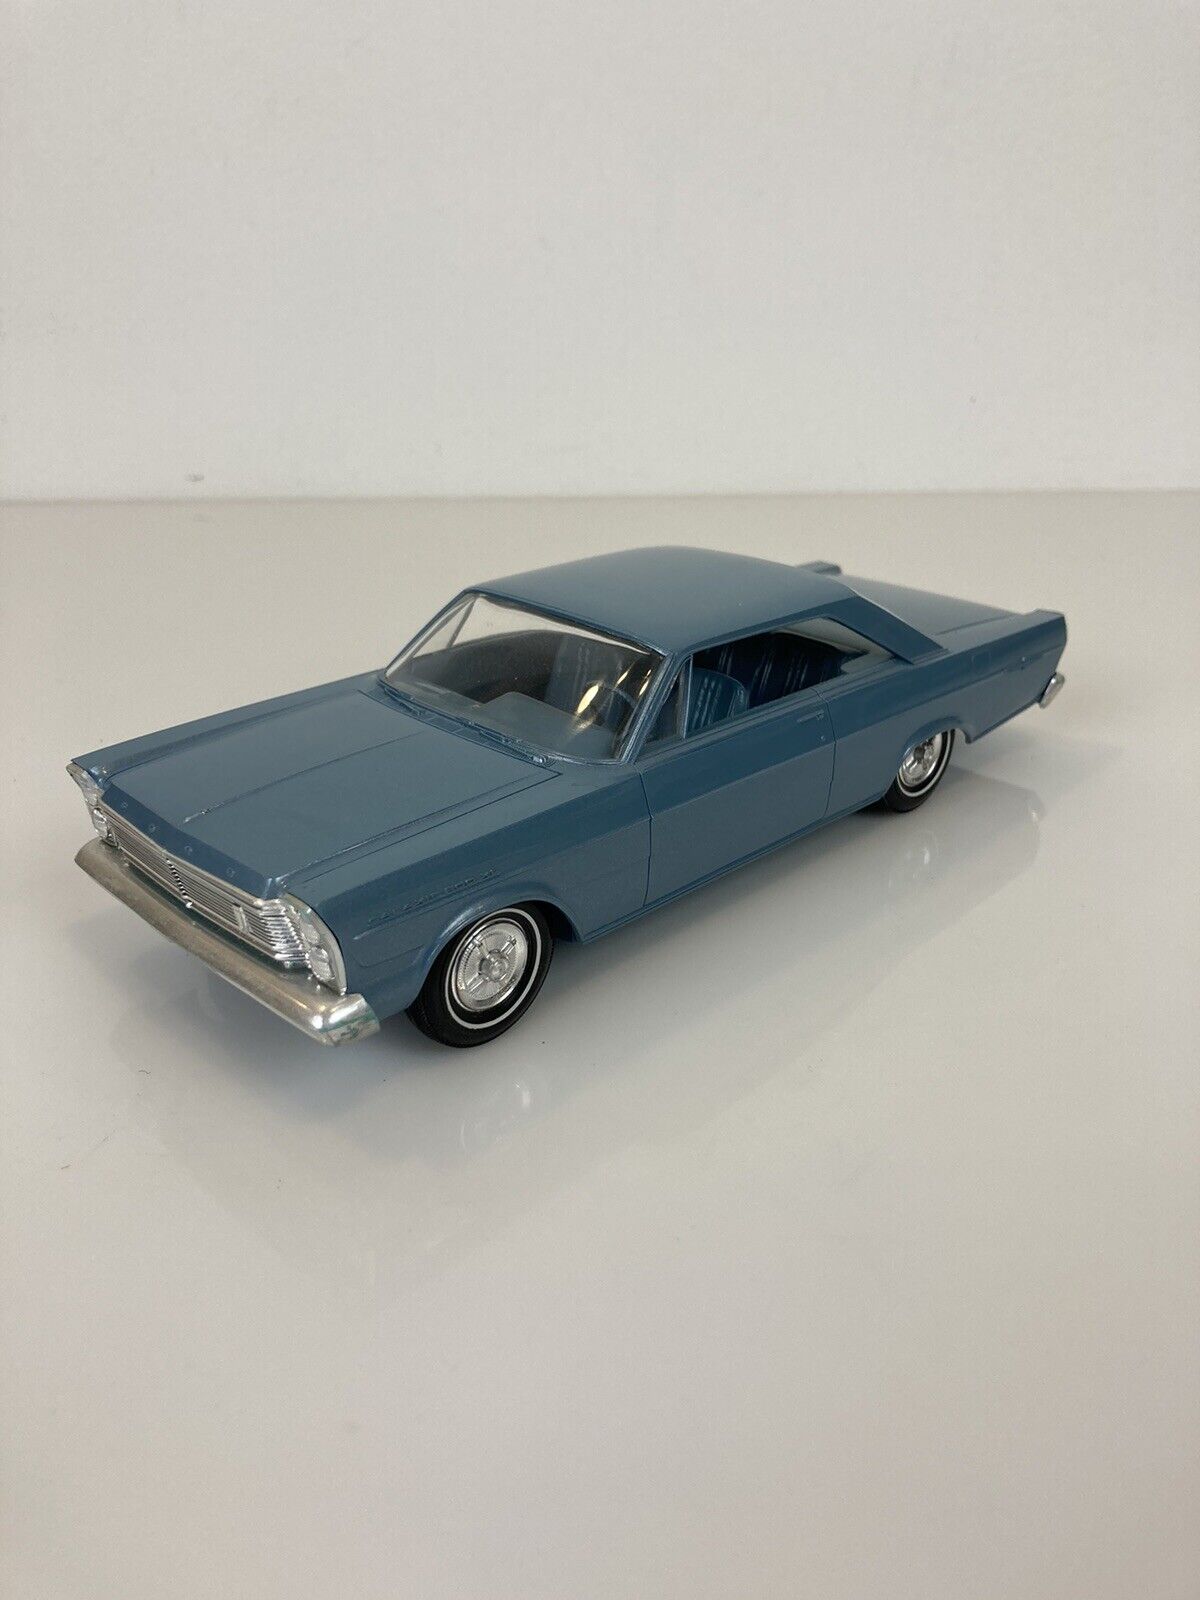 1965 Ford Galaxie 500XL Blue Promo Model - The Elegant World of Ford Collectible